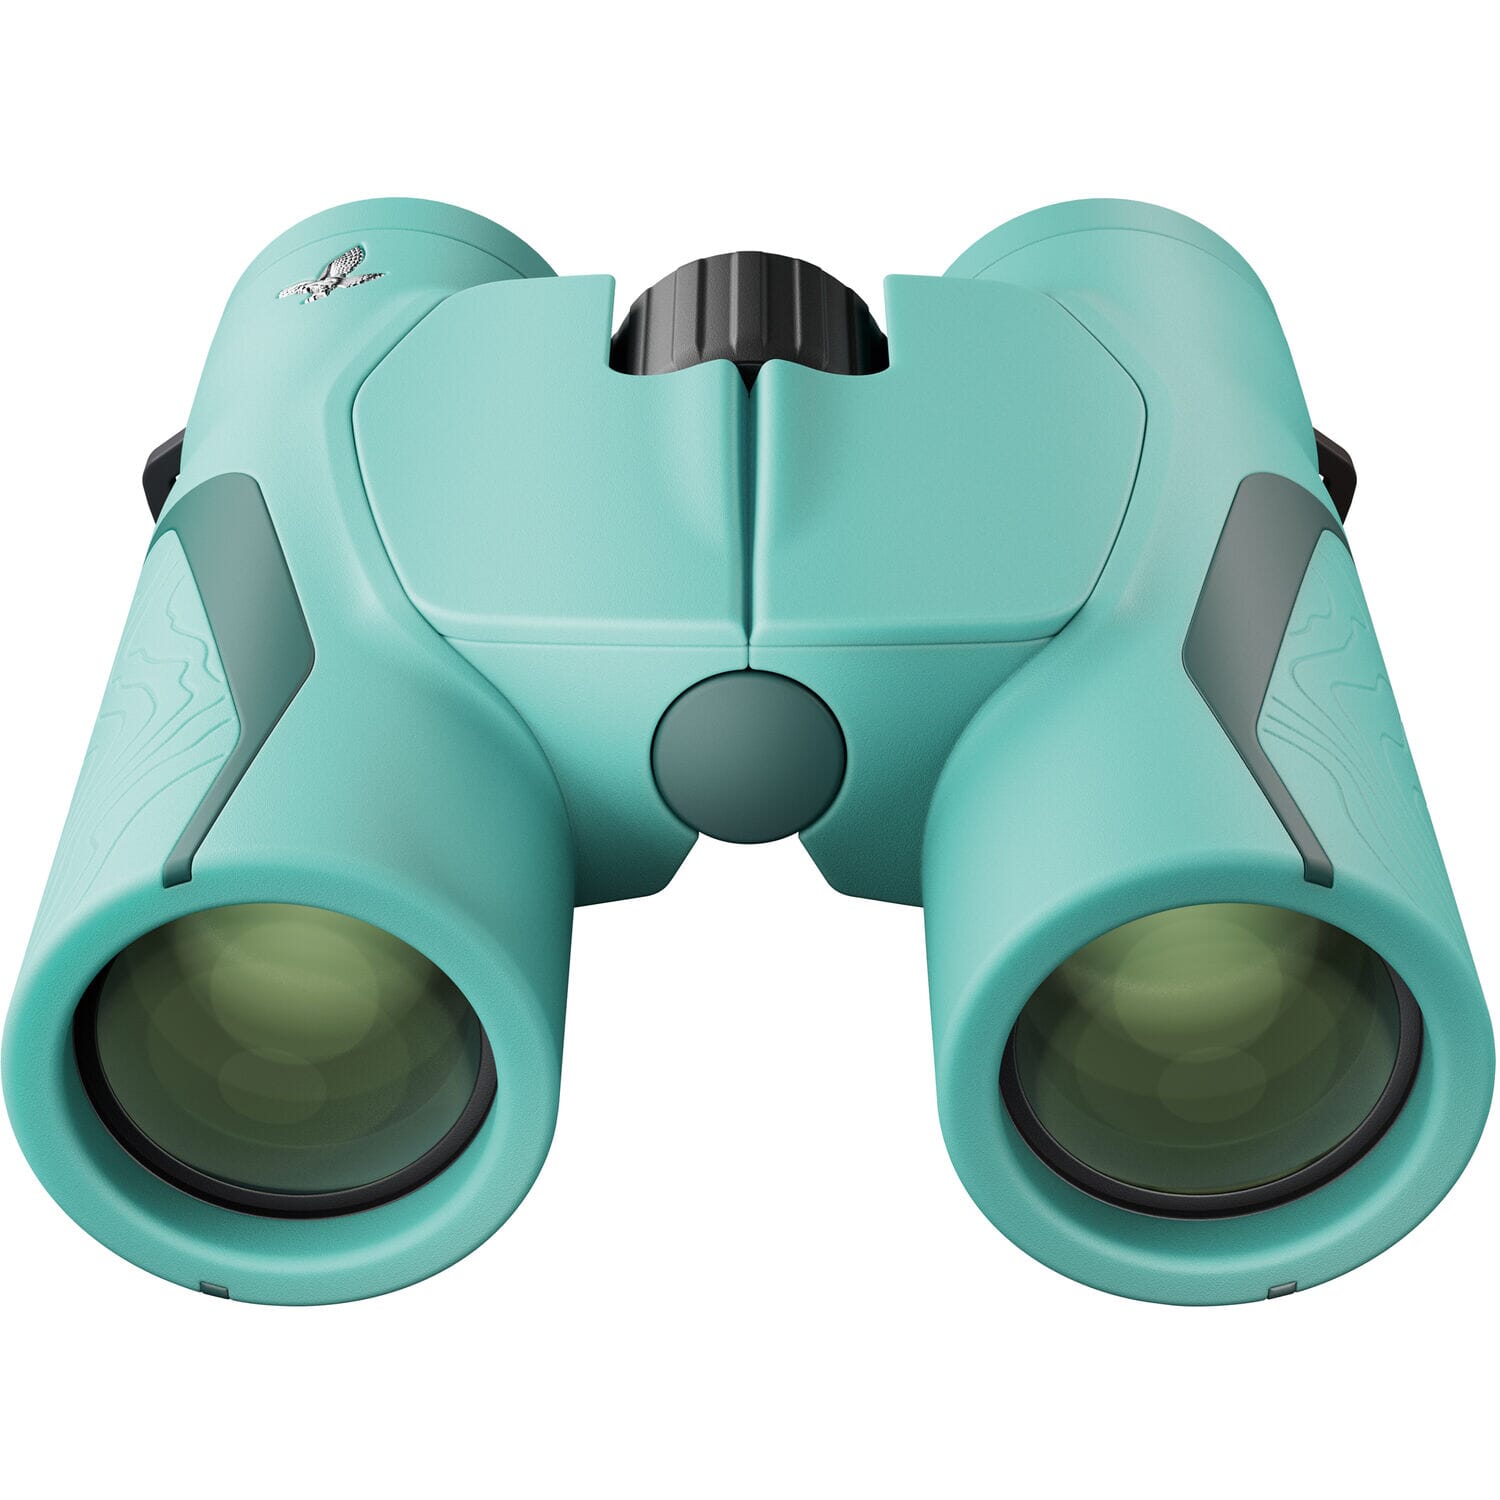 Swarovski MY Junior 7x28 Glacier Blue Binoculars w/Bag, Carrying Strap, Compact Eyepiece Cover & Natures Notes Notebook 38001